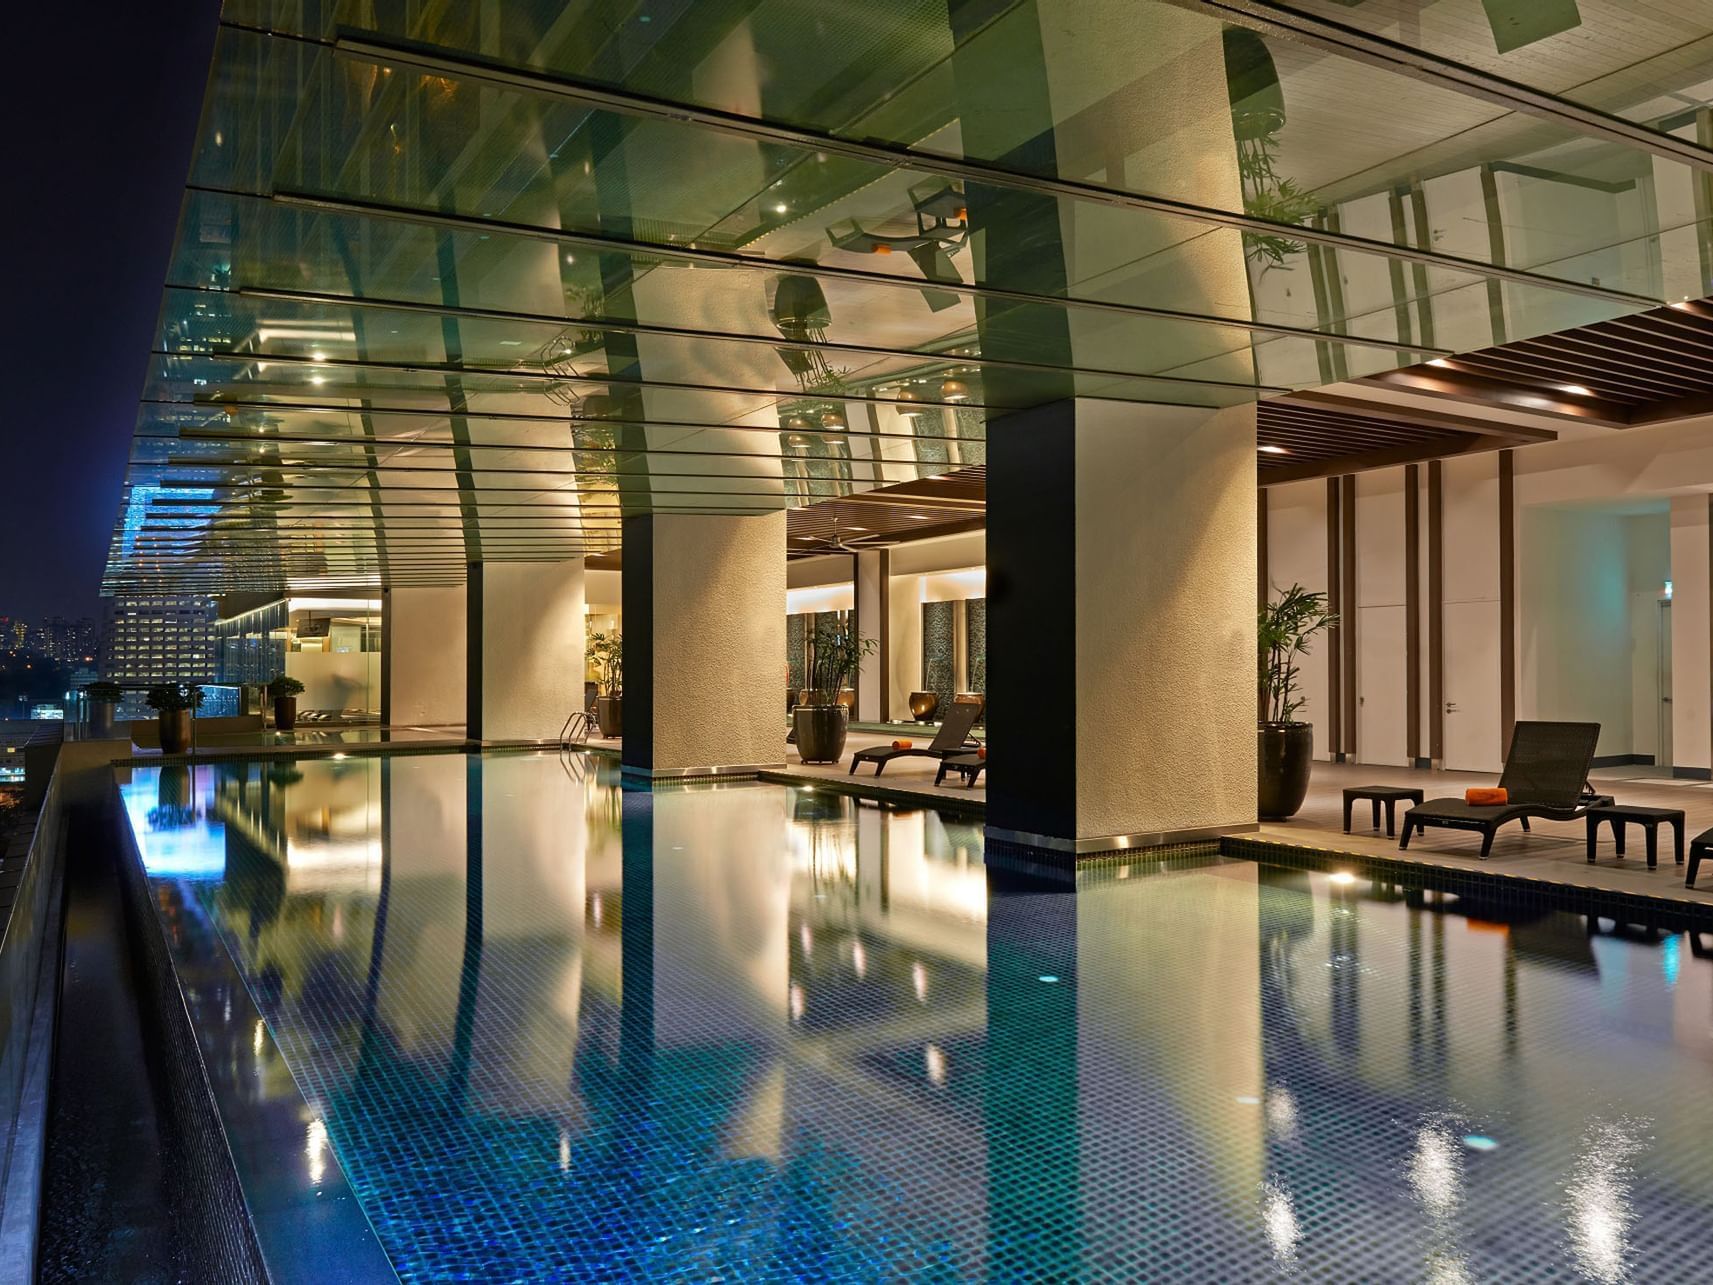 Indoor infinity pool at VE Hotel & Residence at night